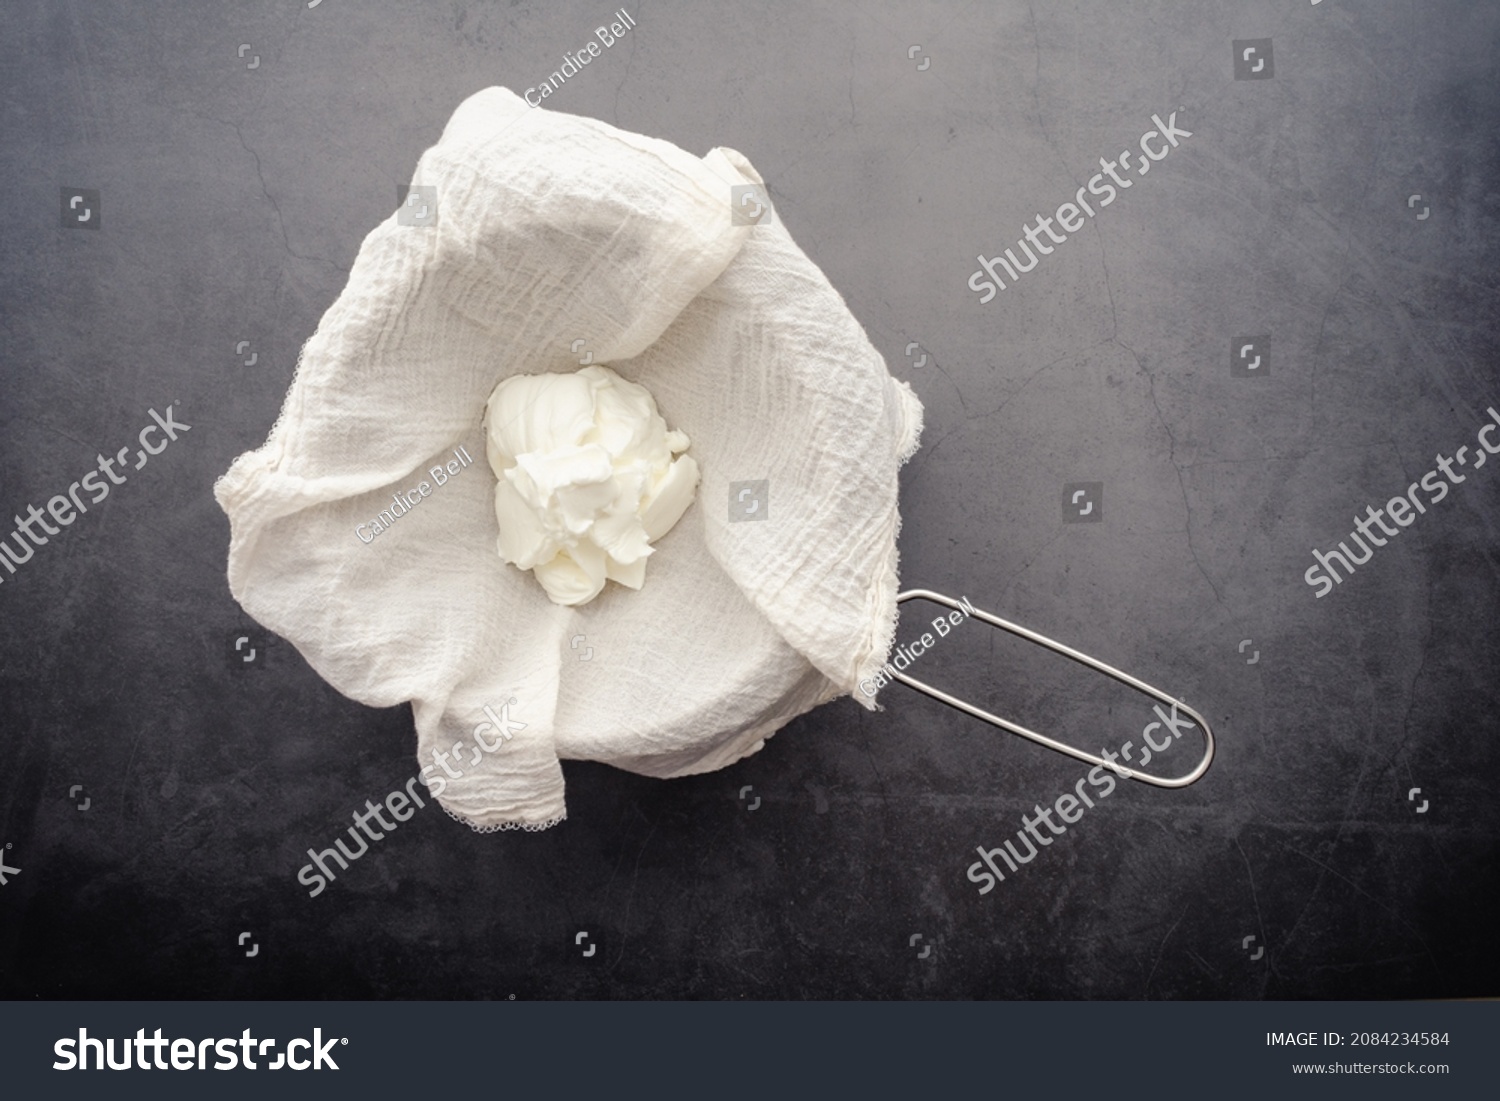 Making Labneh Cheese in a Cheesecloth Lined Strainer: Straining yogurt mixed with lemon juice and salt to make cheese #2084234584